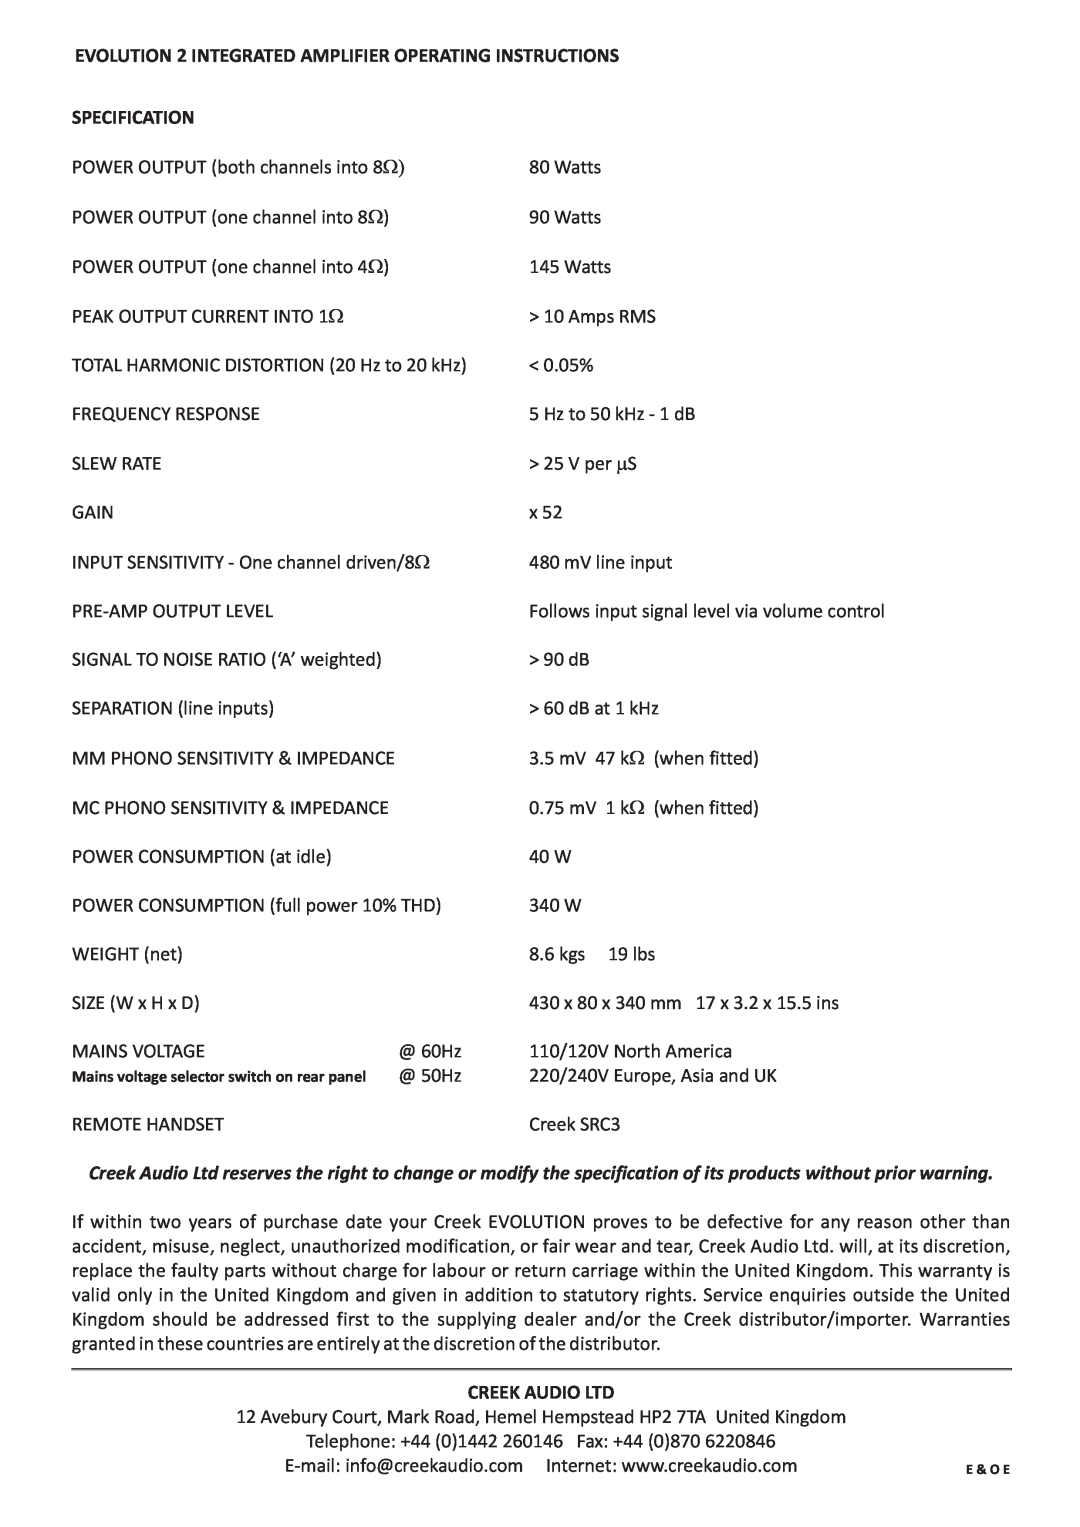 Creek Audio Evolution 2 operating instructions Specification 